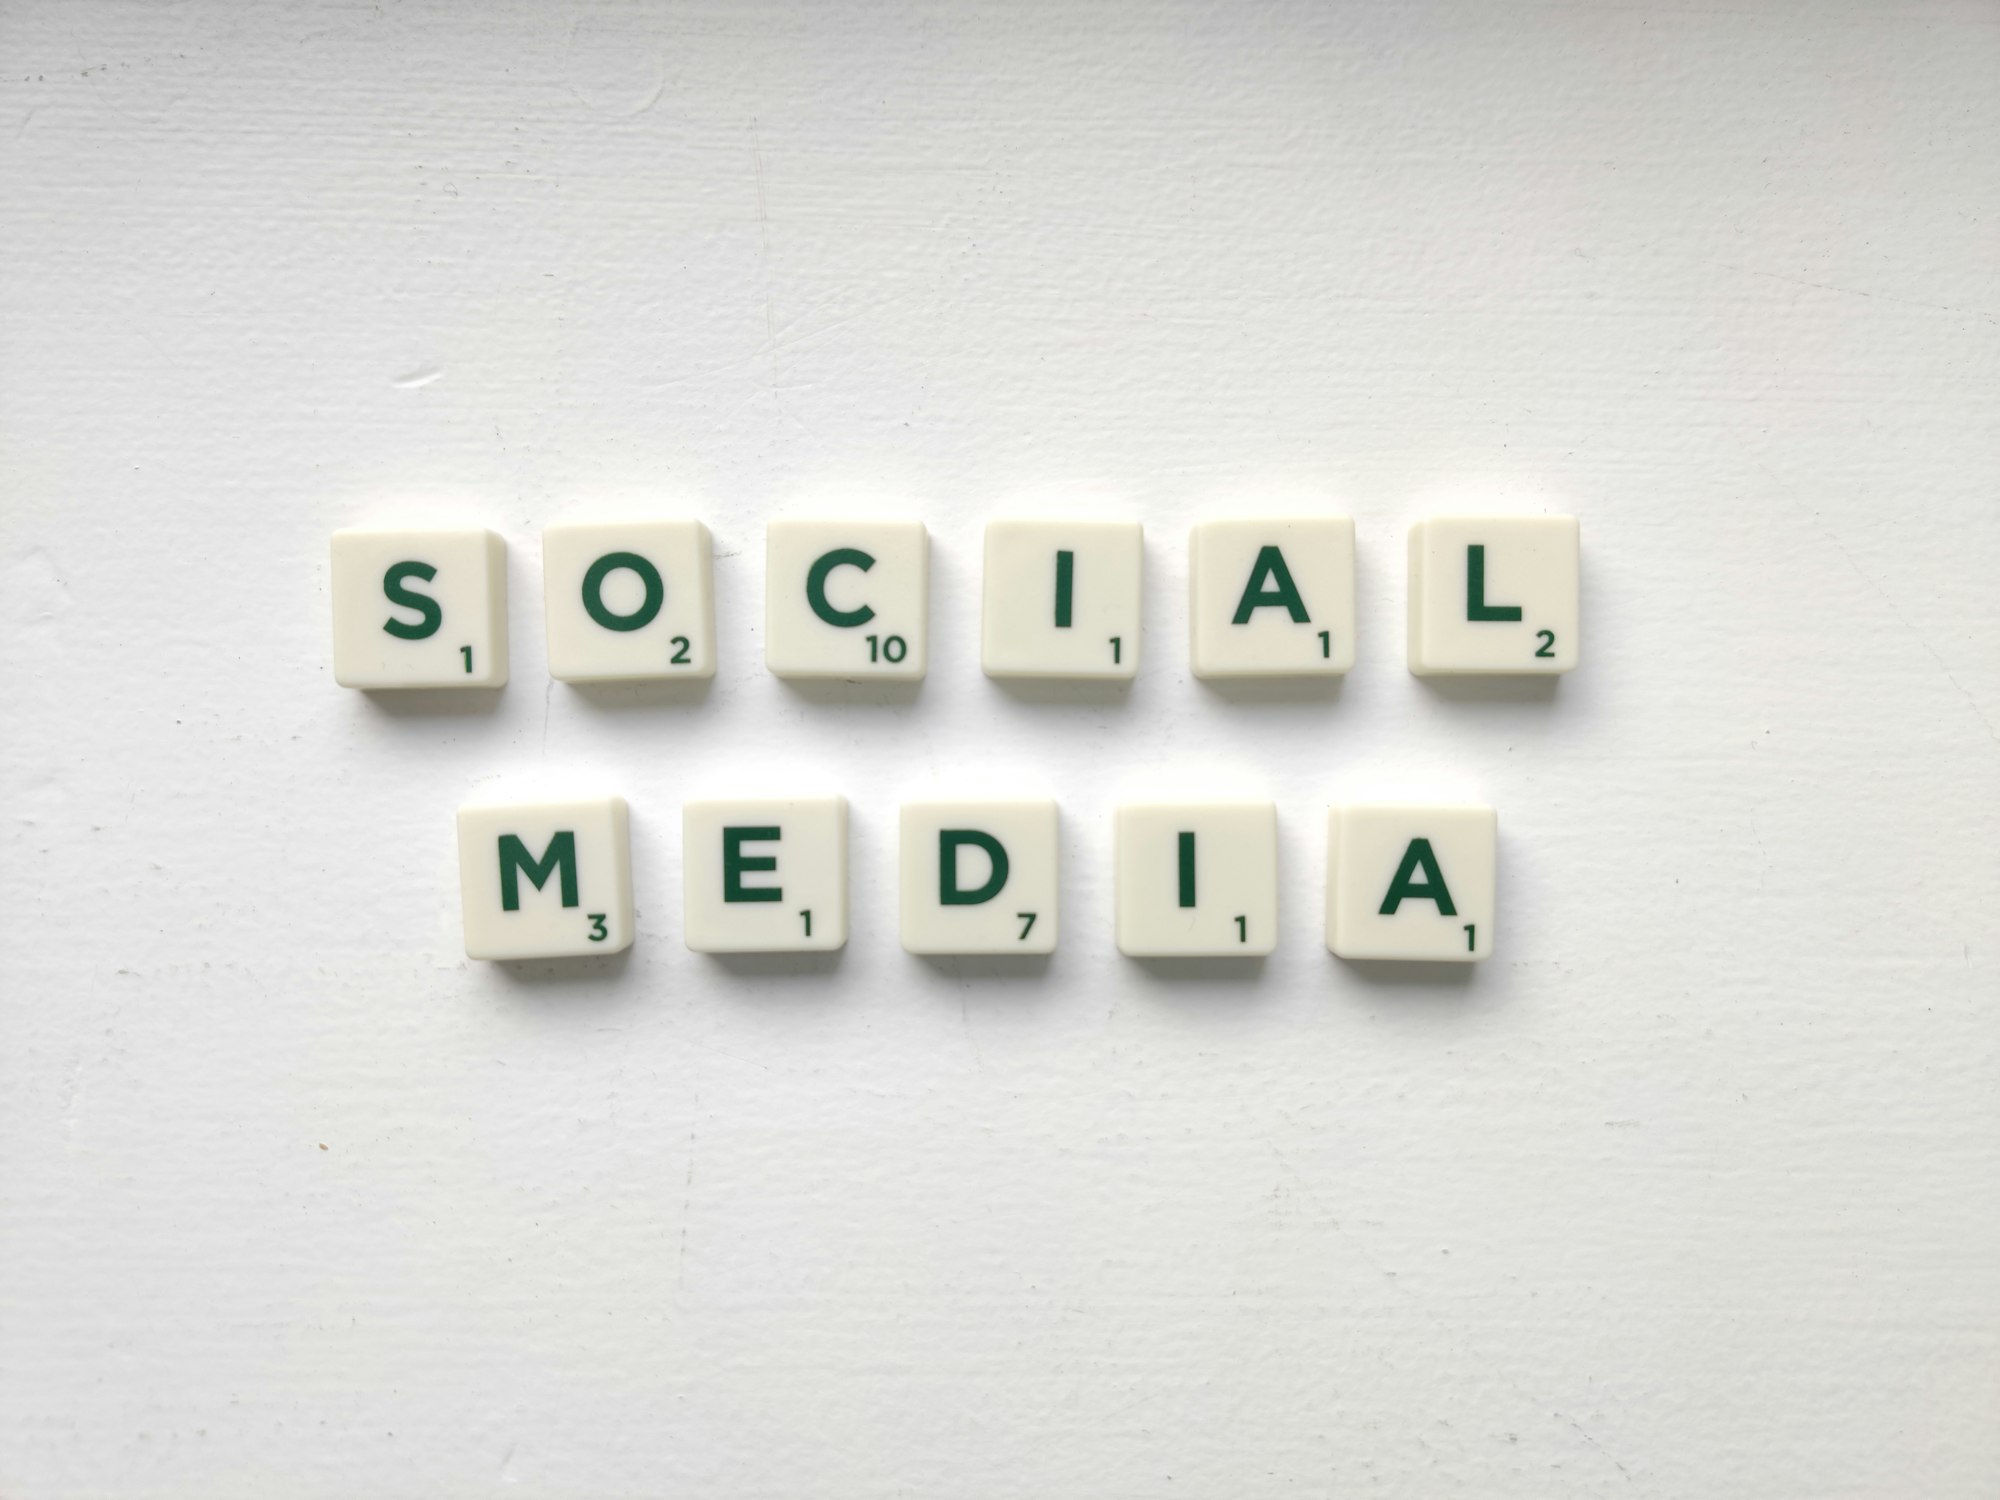 Hire Social Media Manager: Small Business Guide